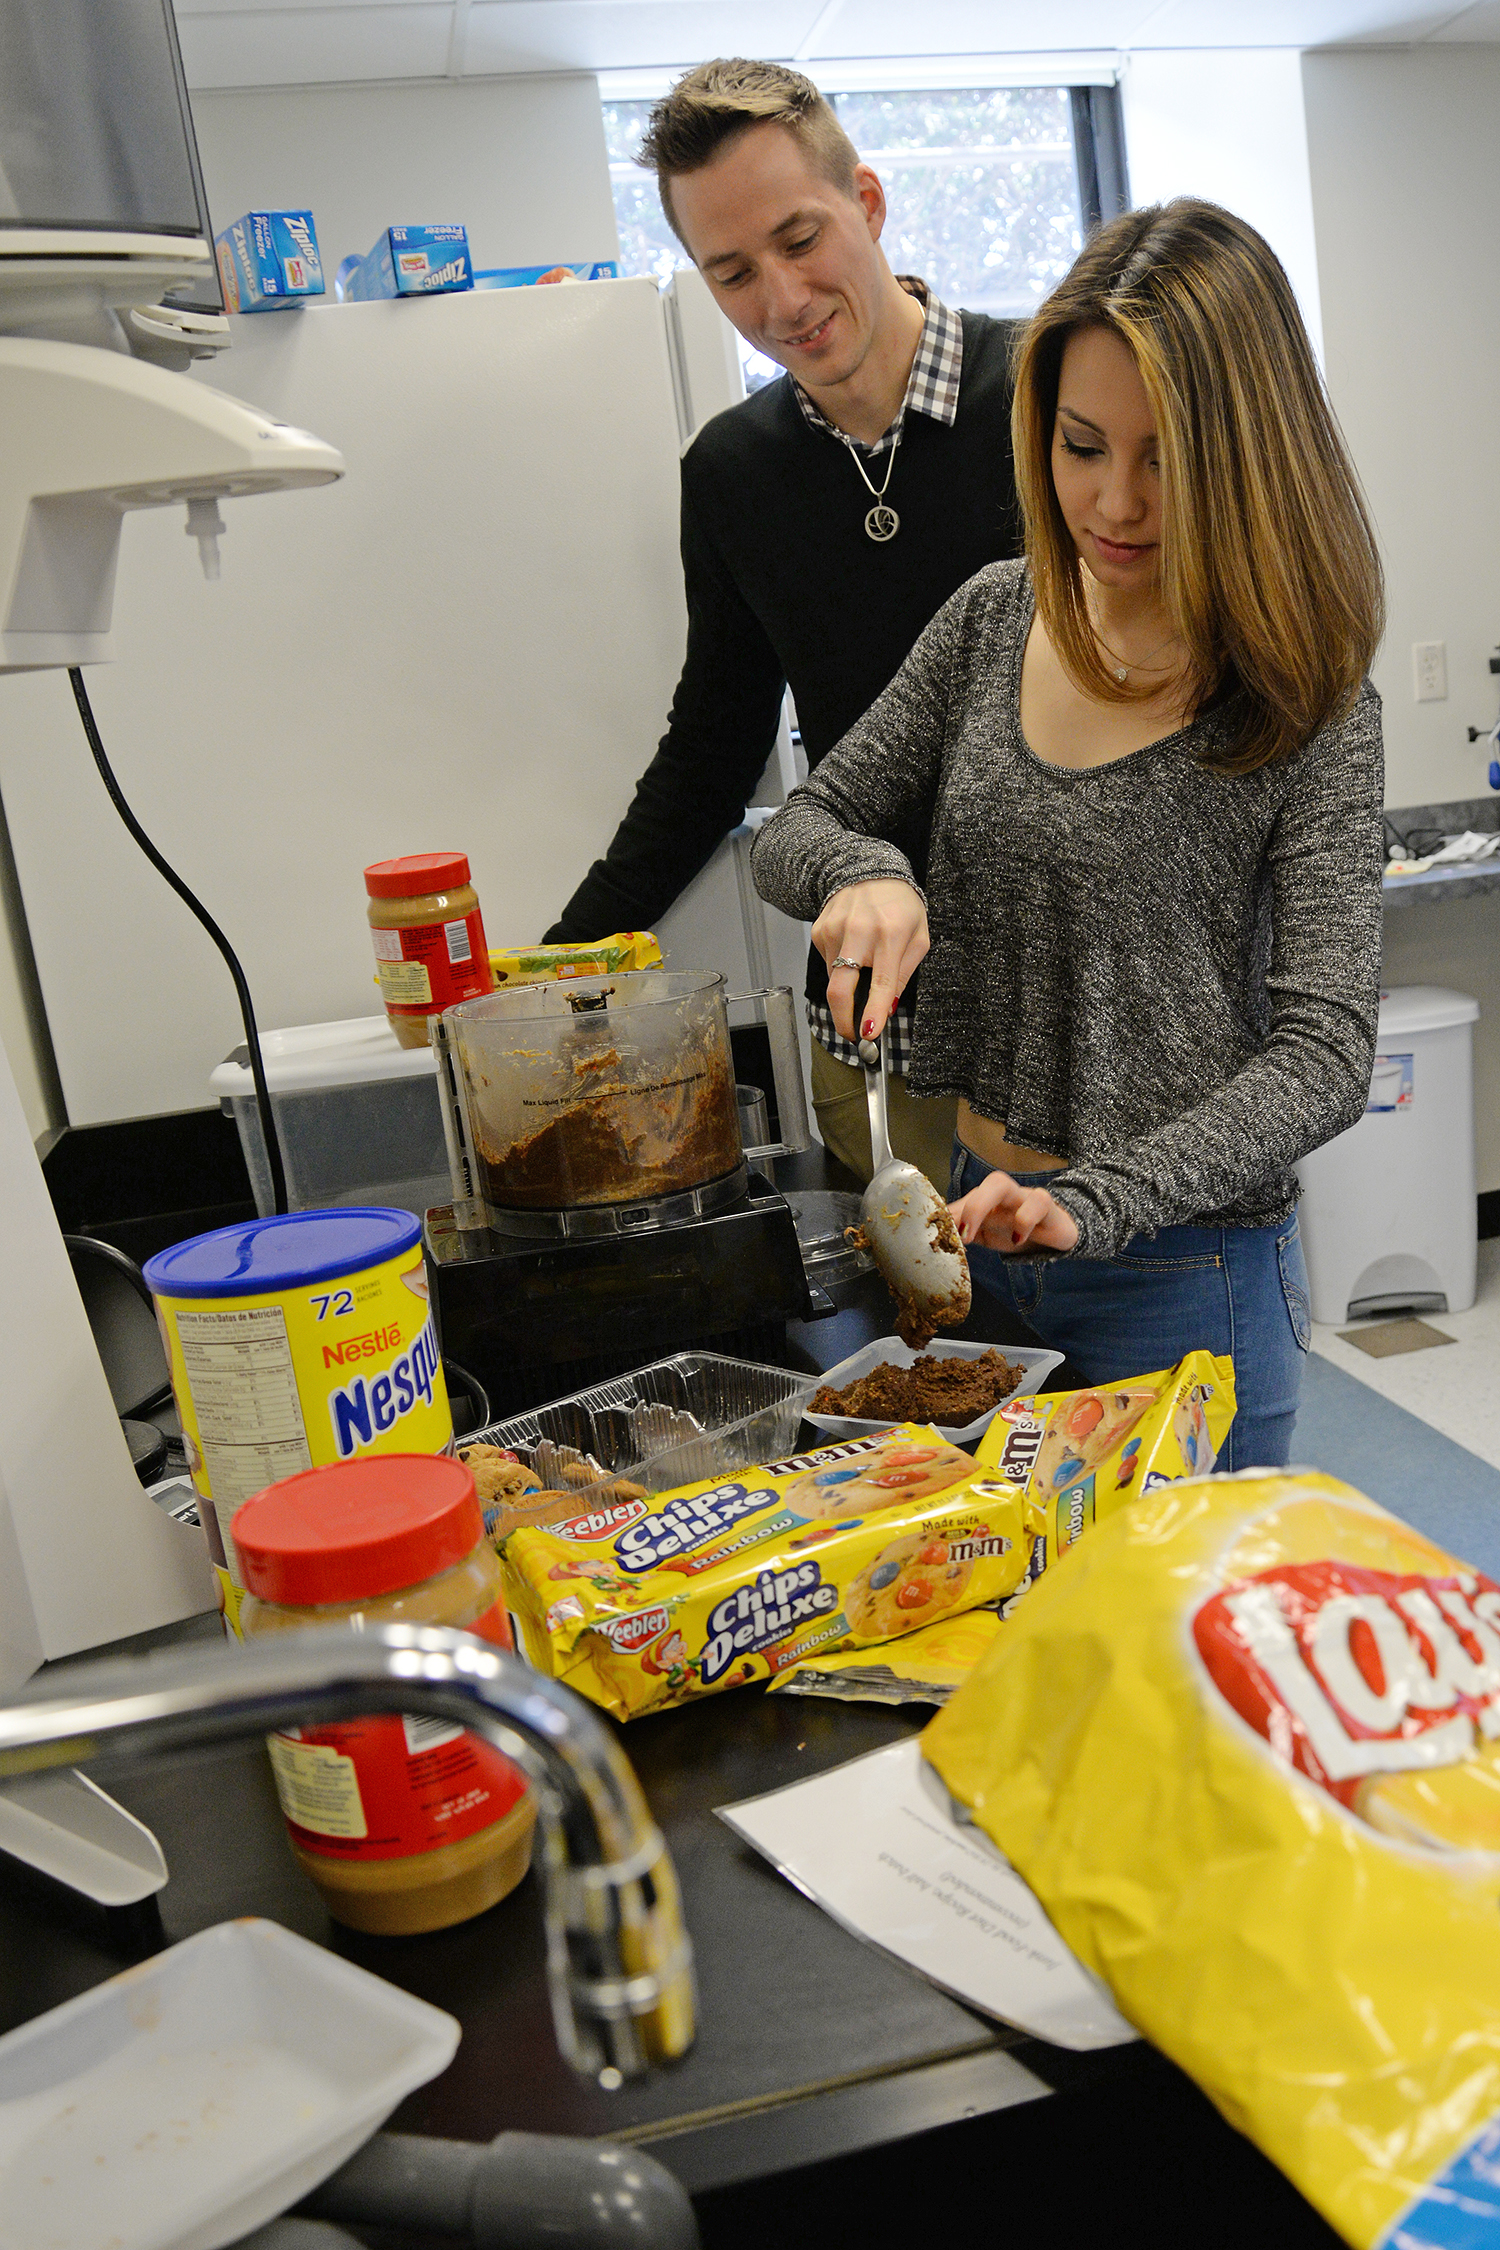 Mike Robinson and Rebecca Tom '16 remove the junk food concoction from the food processor.